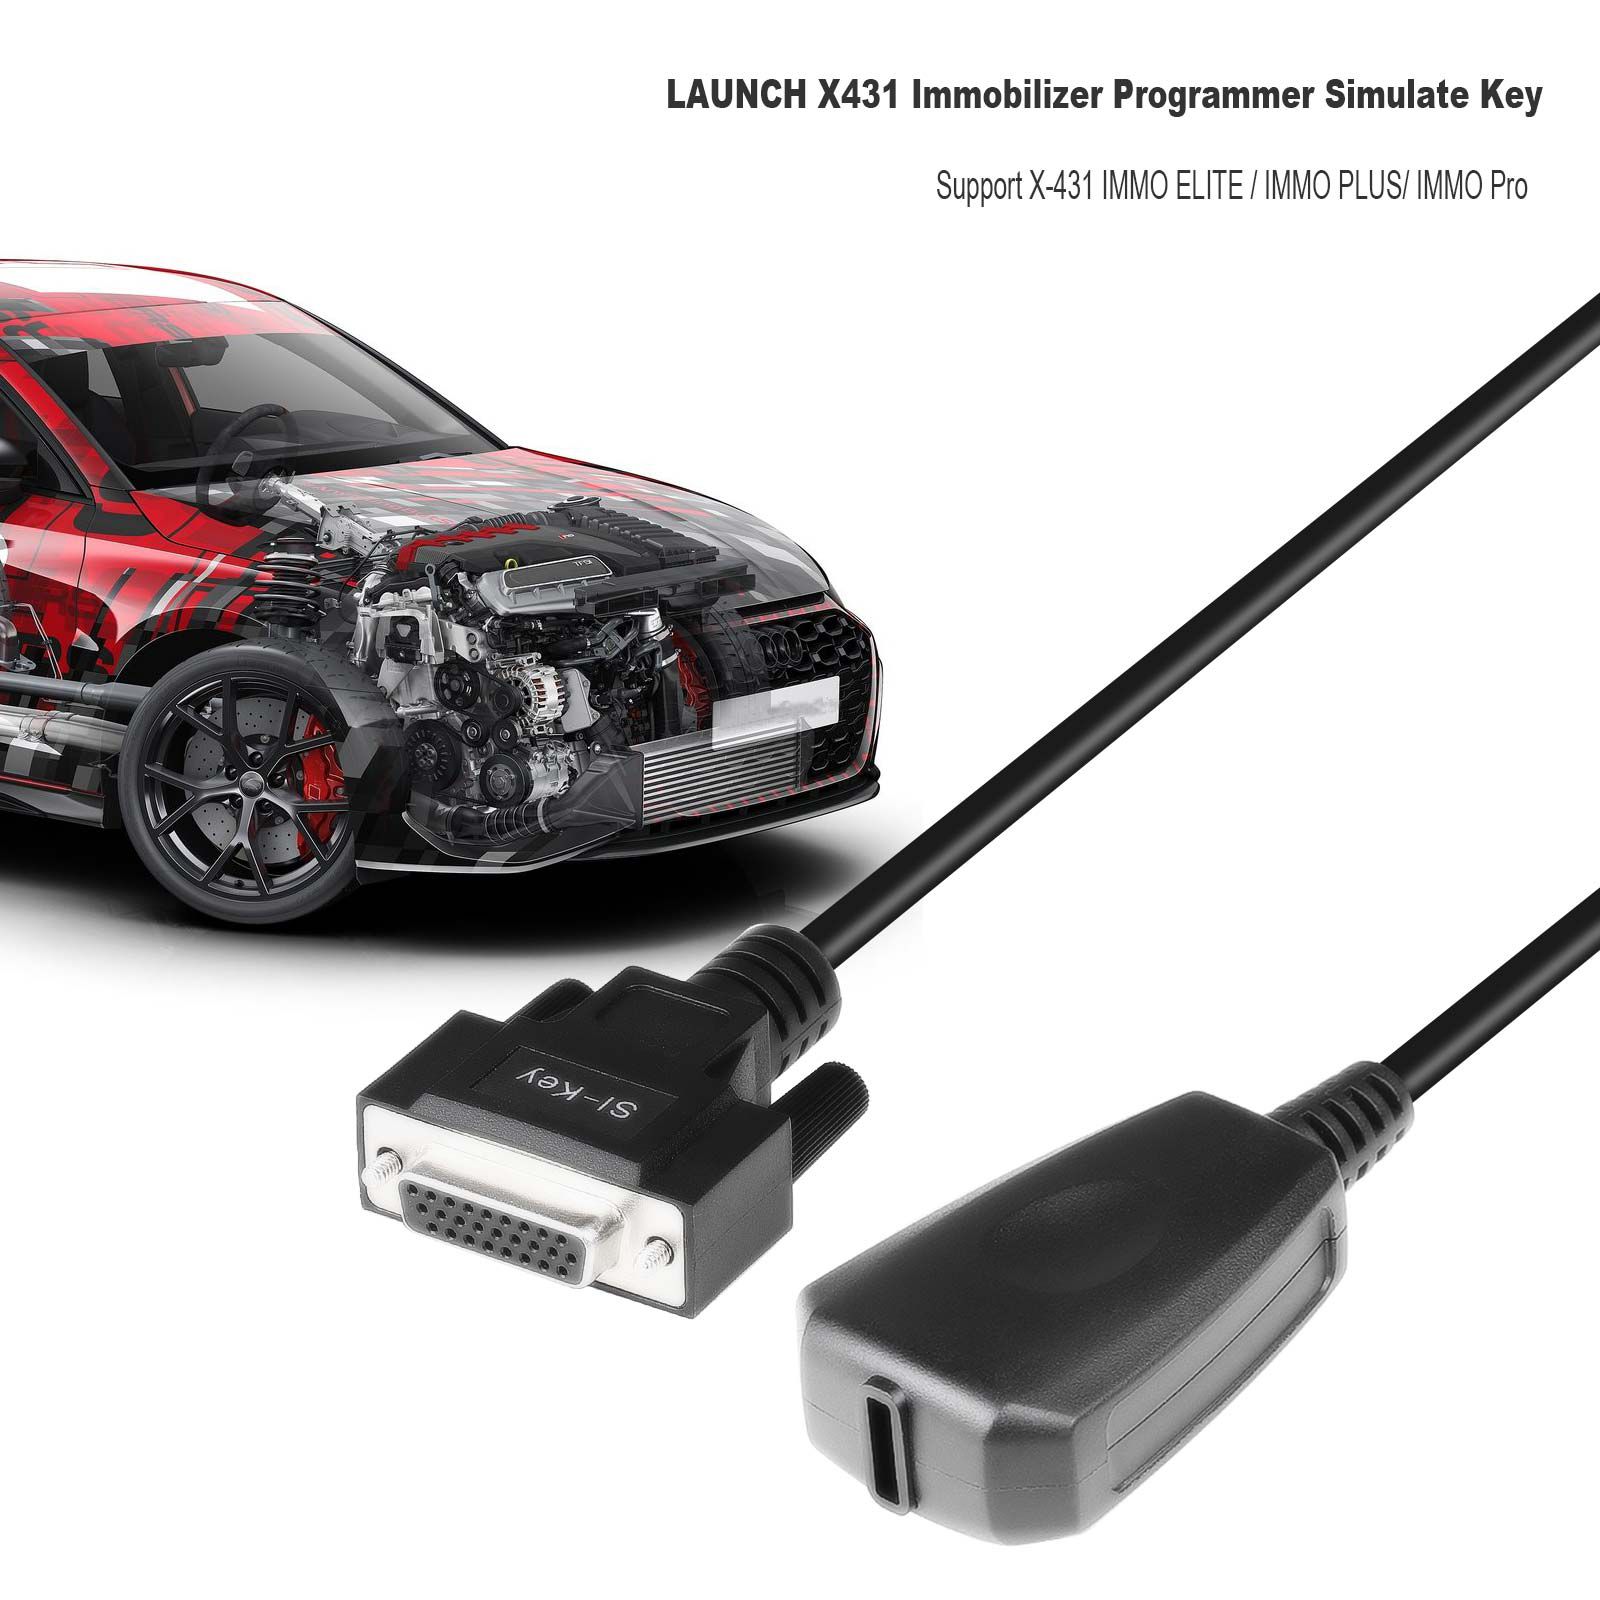 Launch X431 Immobilizer Programmer Simulator Key SI-KEY work with X431 IMMO Plus/ IMMO Pro/ IMMO Elite/ GIII X-Prog 3 for Toyota All Key Lost